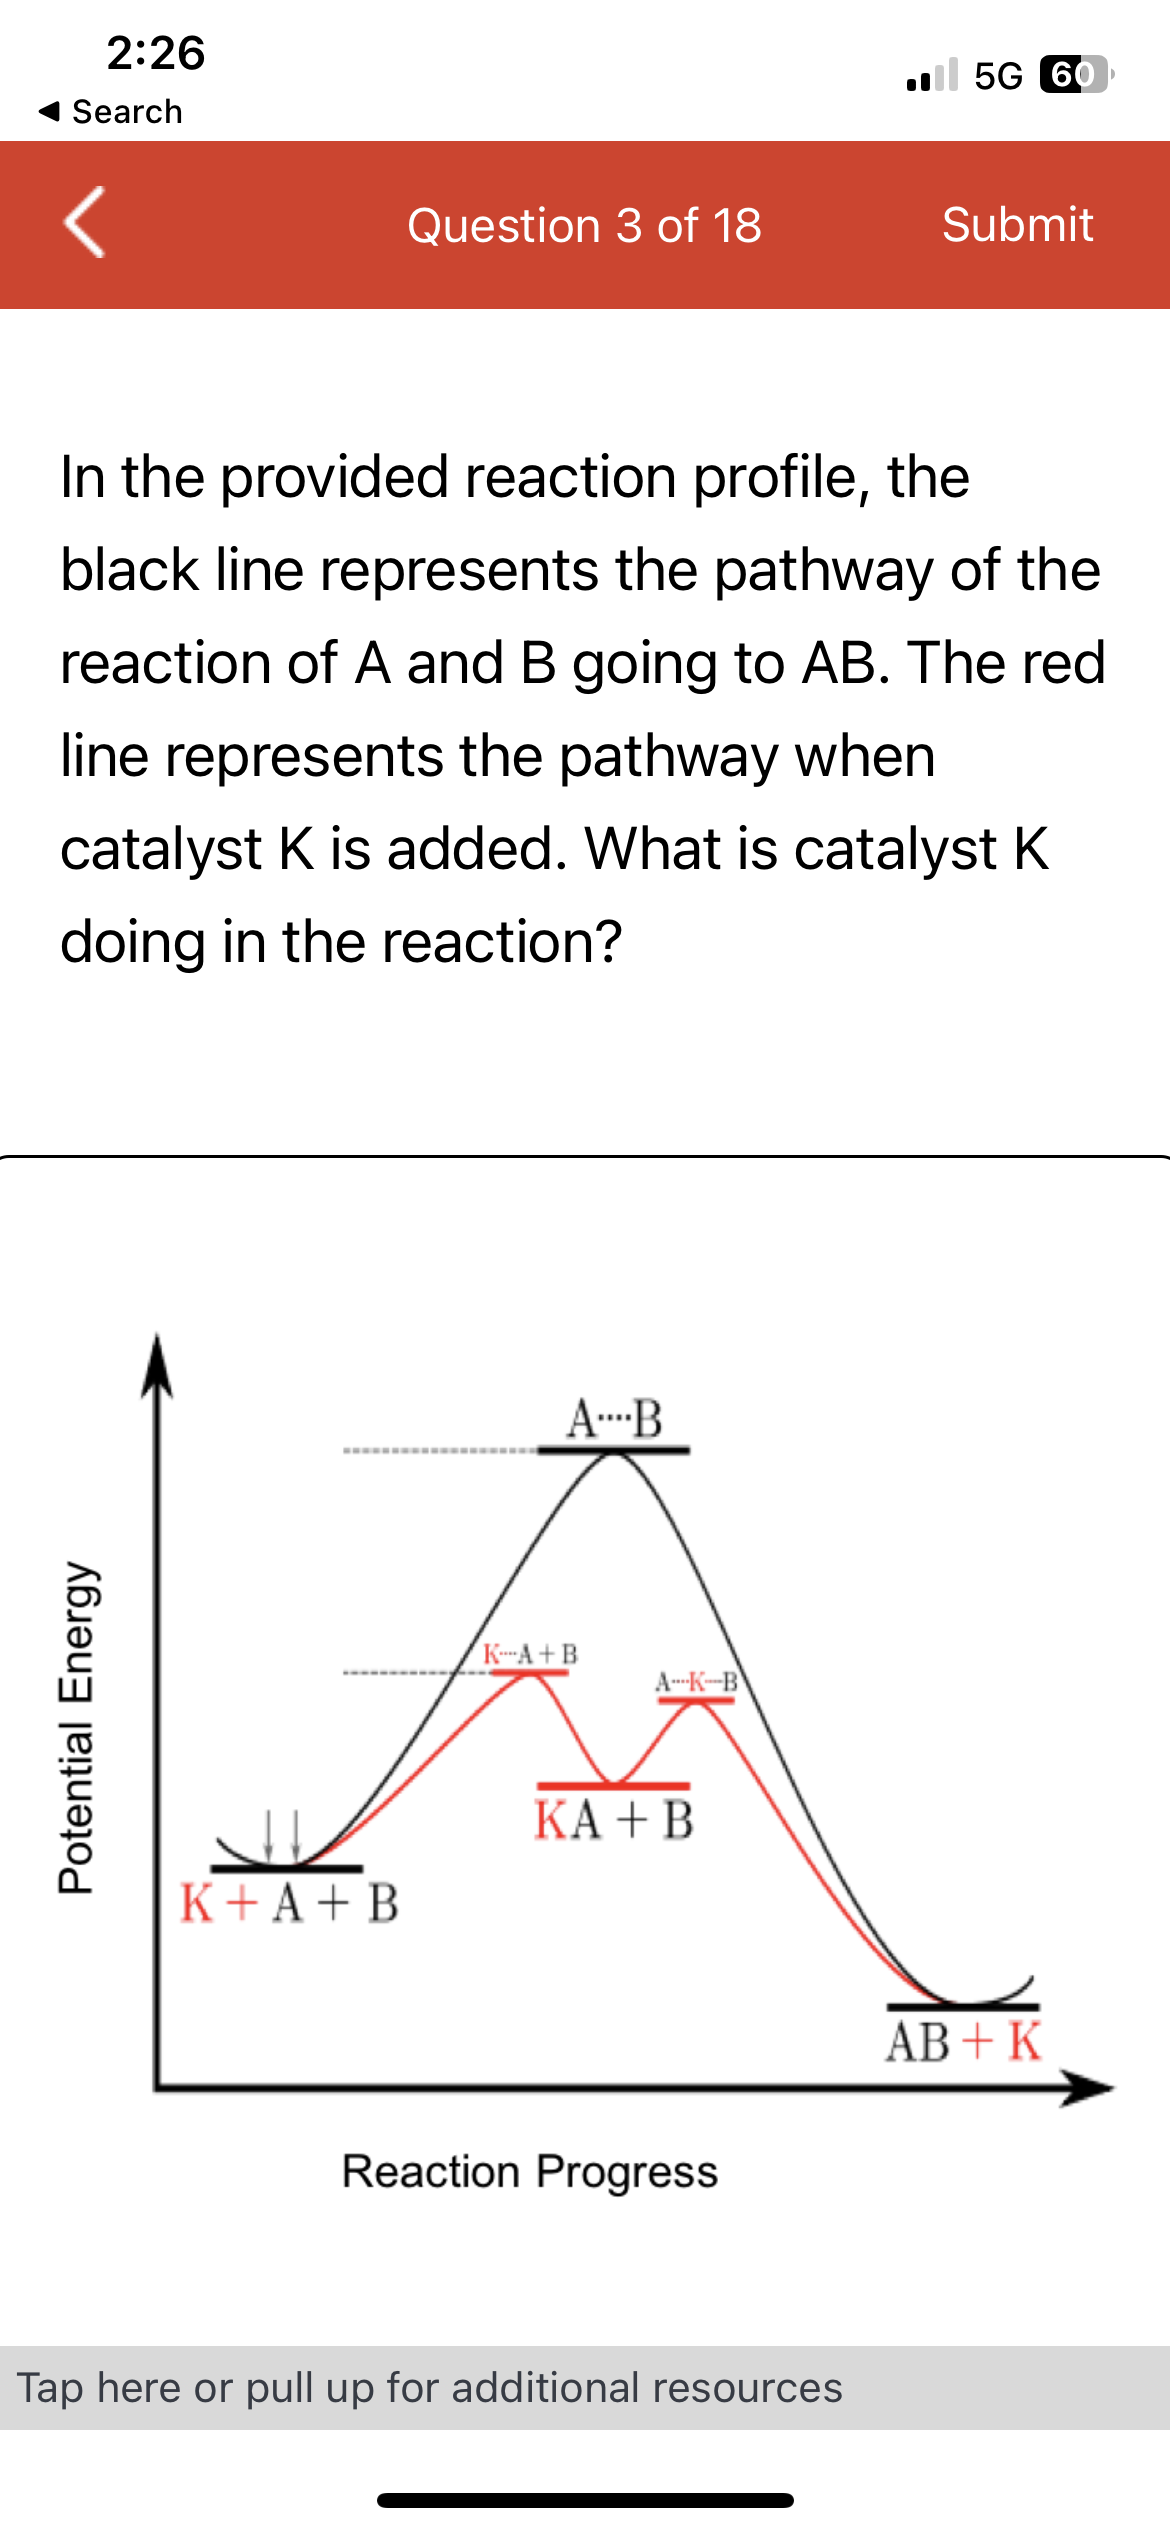 2:26
Search
Potential Energy
Question 3 of 18
K + A + B
In the provided reaction profile, the
black line represents the pathway of the
reaction of A and B going to AB. The red
line represents the pathway when
catalyst K is added. What is catalyst K
doing in the reaction?
AB
K-A+B
A-K-B
KA + B
Reaction Progress
5G 60
Tap here or pull up for additional resources
Submit
AB+K